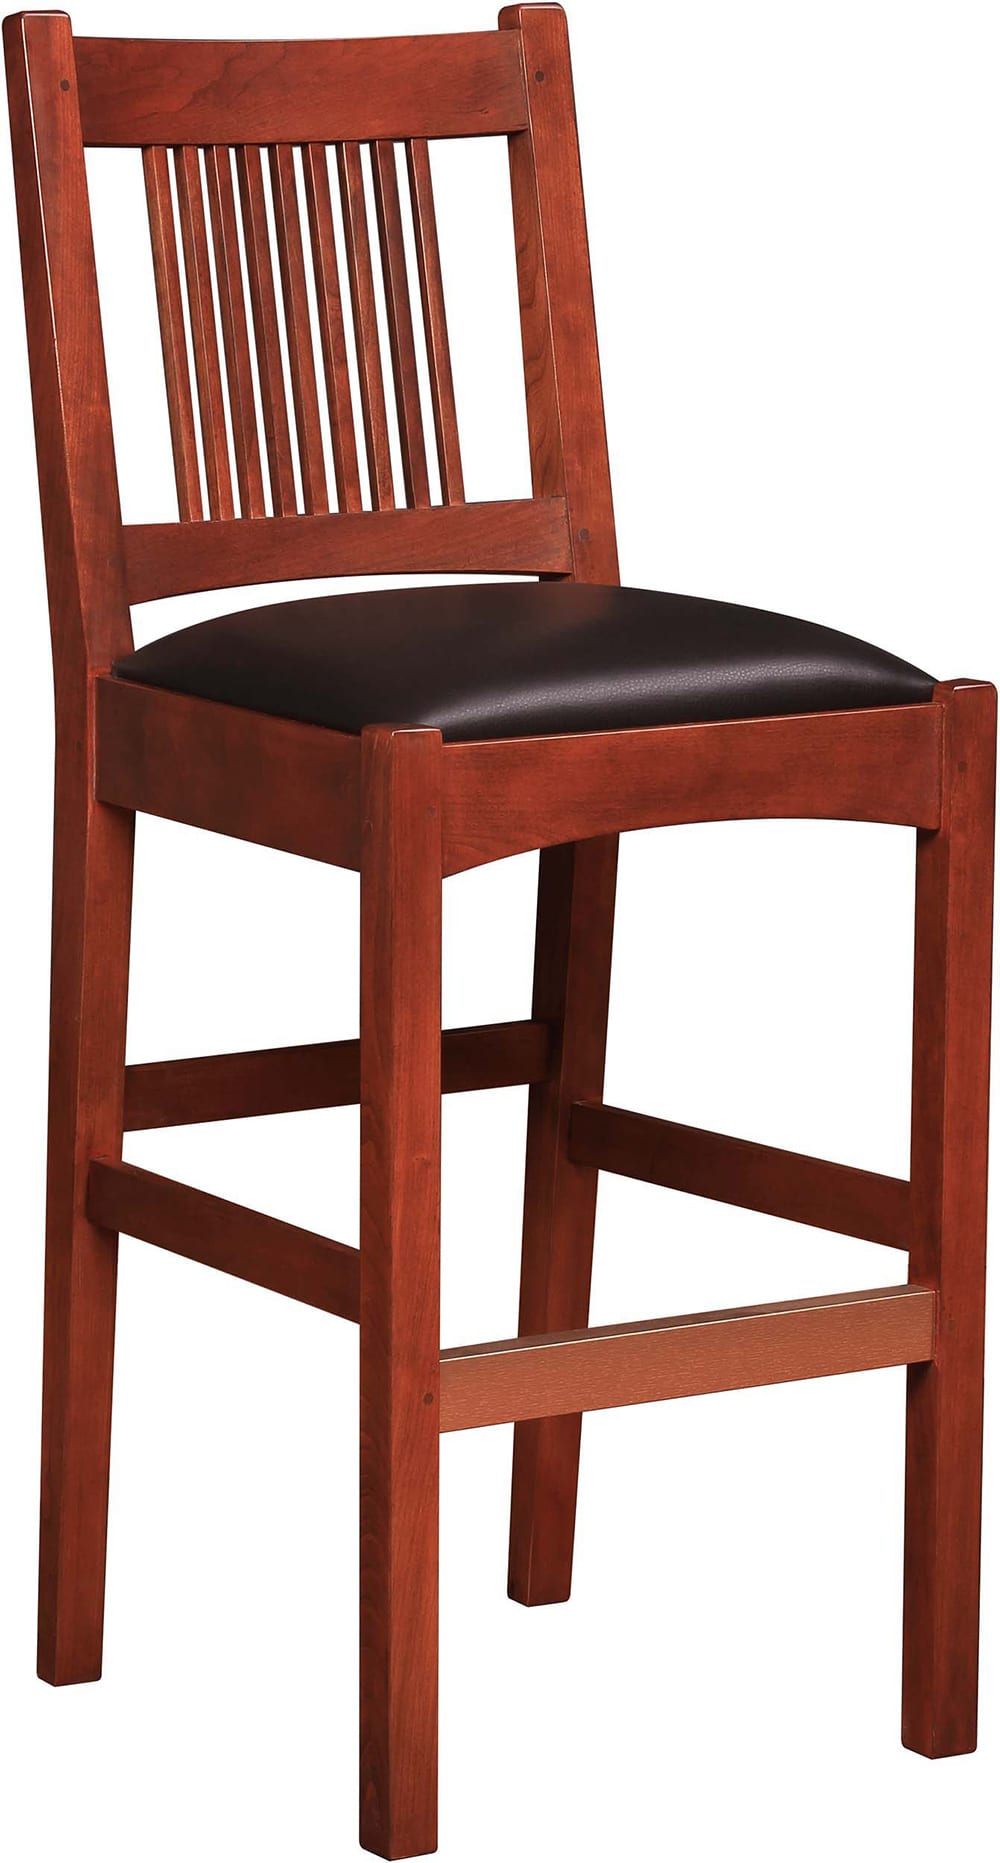 Spindle Stool - Stickley Brand